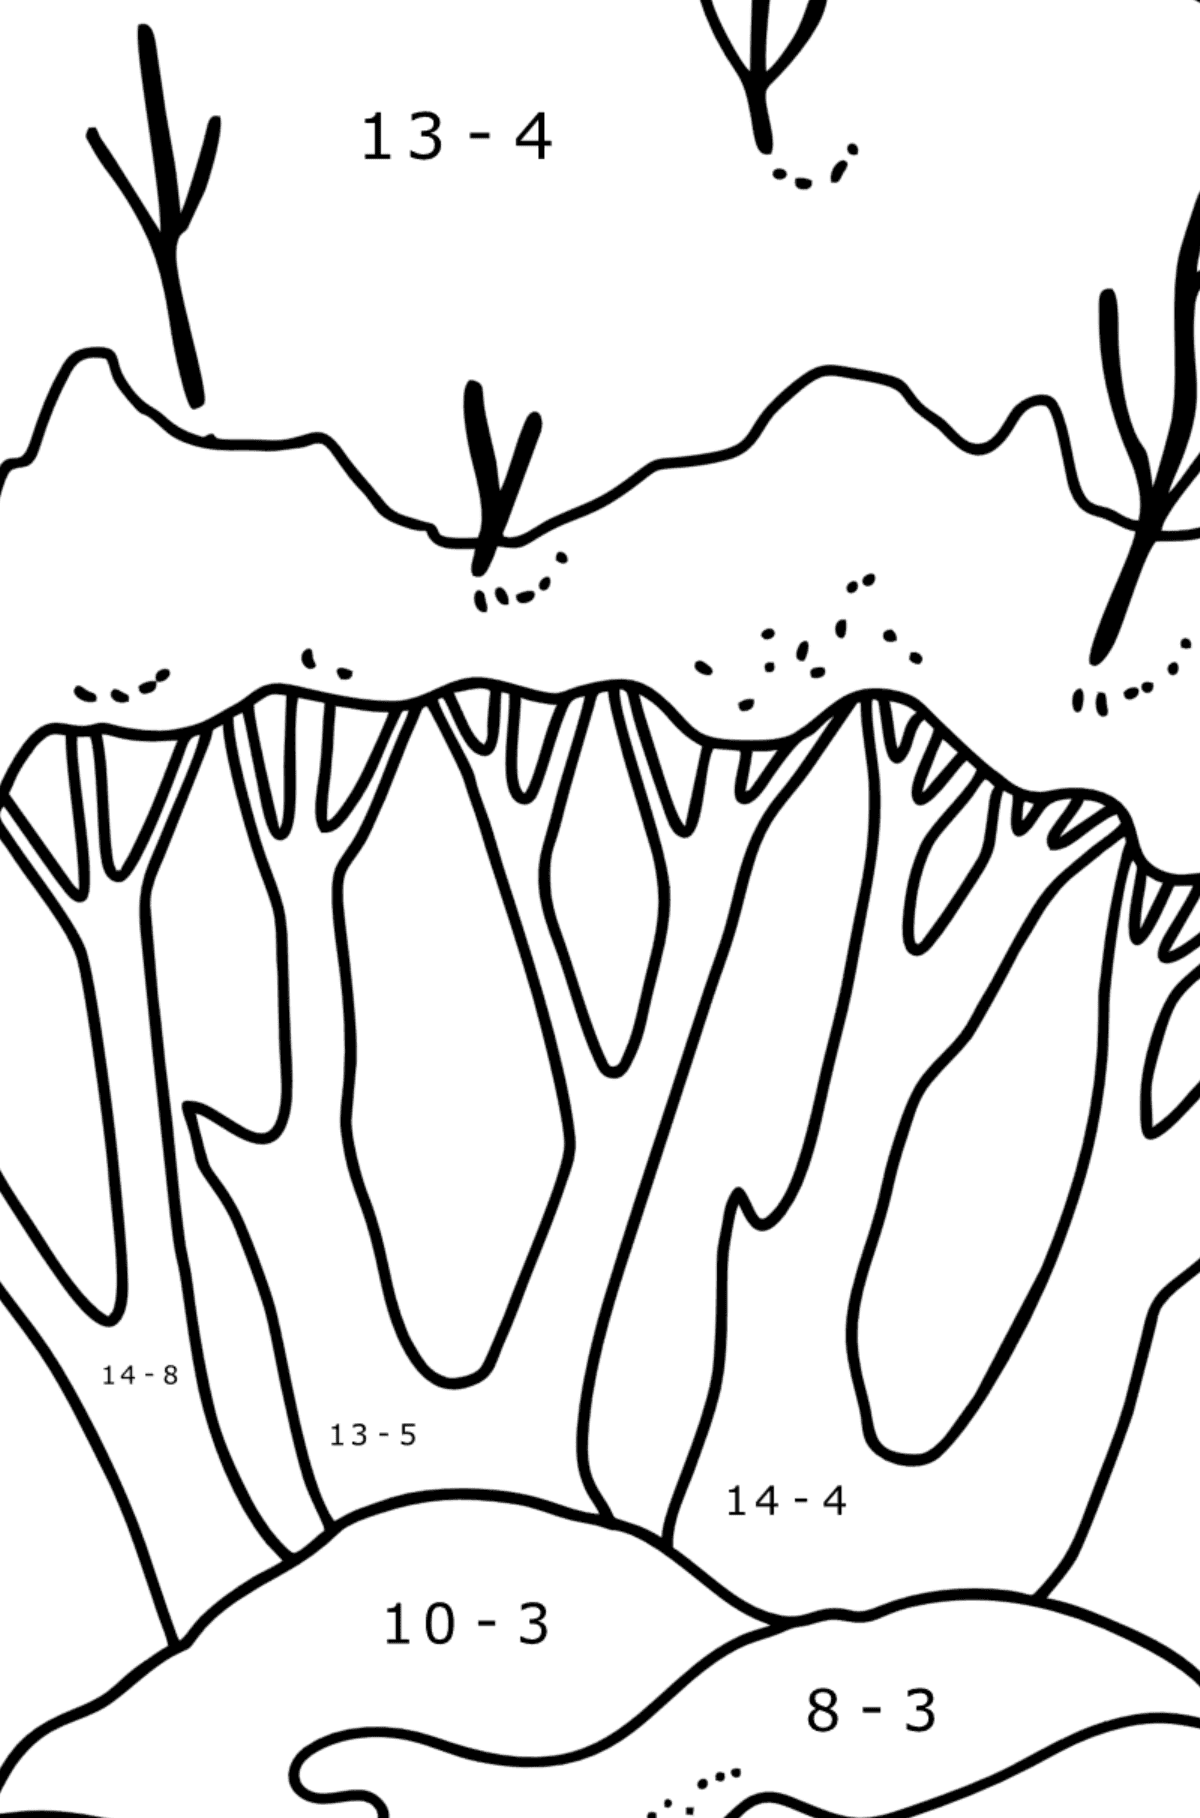 Winter Trees coloring page - Math Coloring - Subtraction for Kids